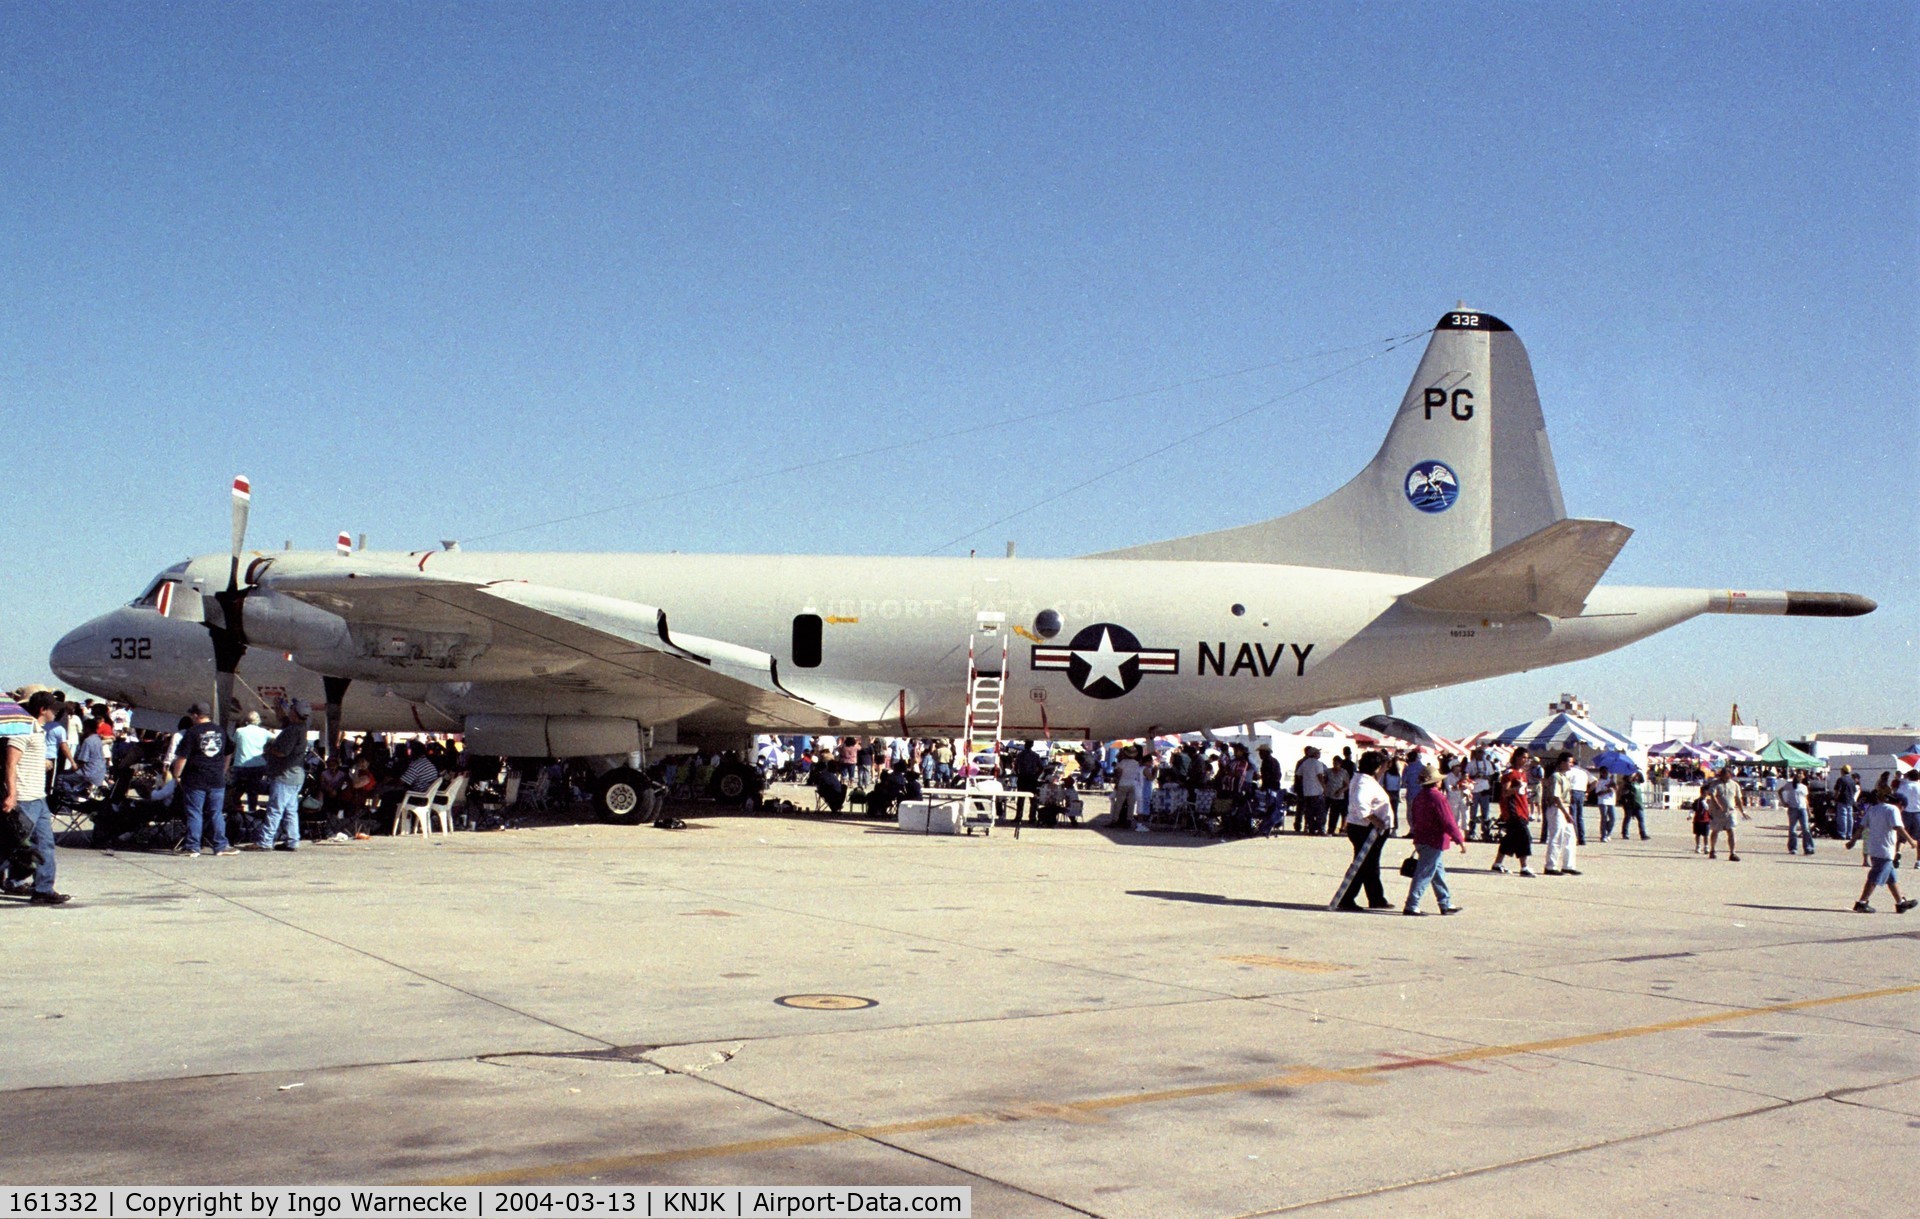 161332, Lockheed P-3C Orion C/N 285A-5729, Lockheed P-3C Orion of the US Navy at the 2004 airshow at El Centro NAS, CA